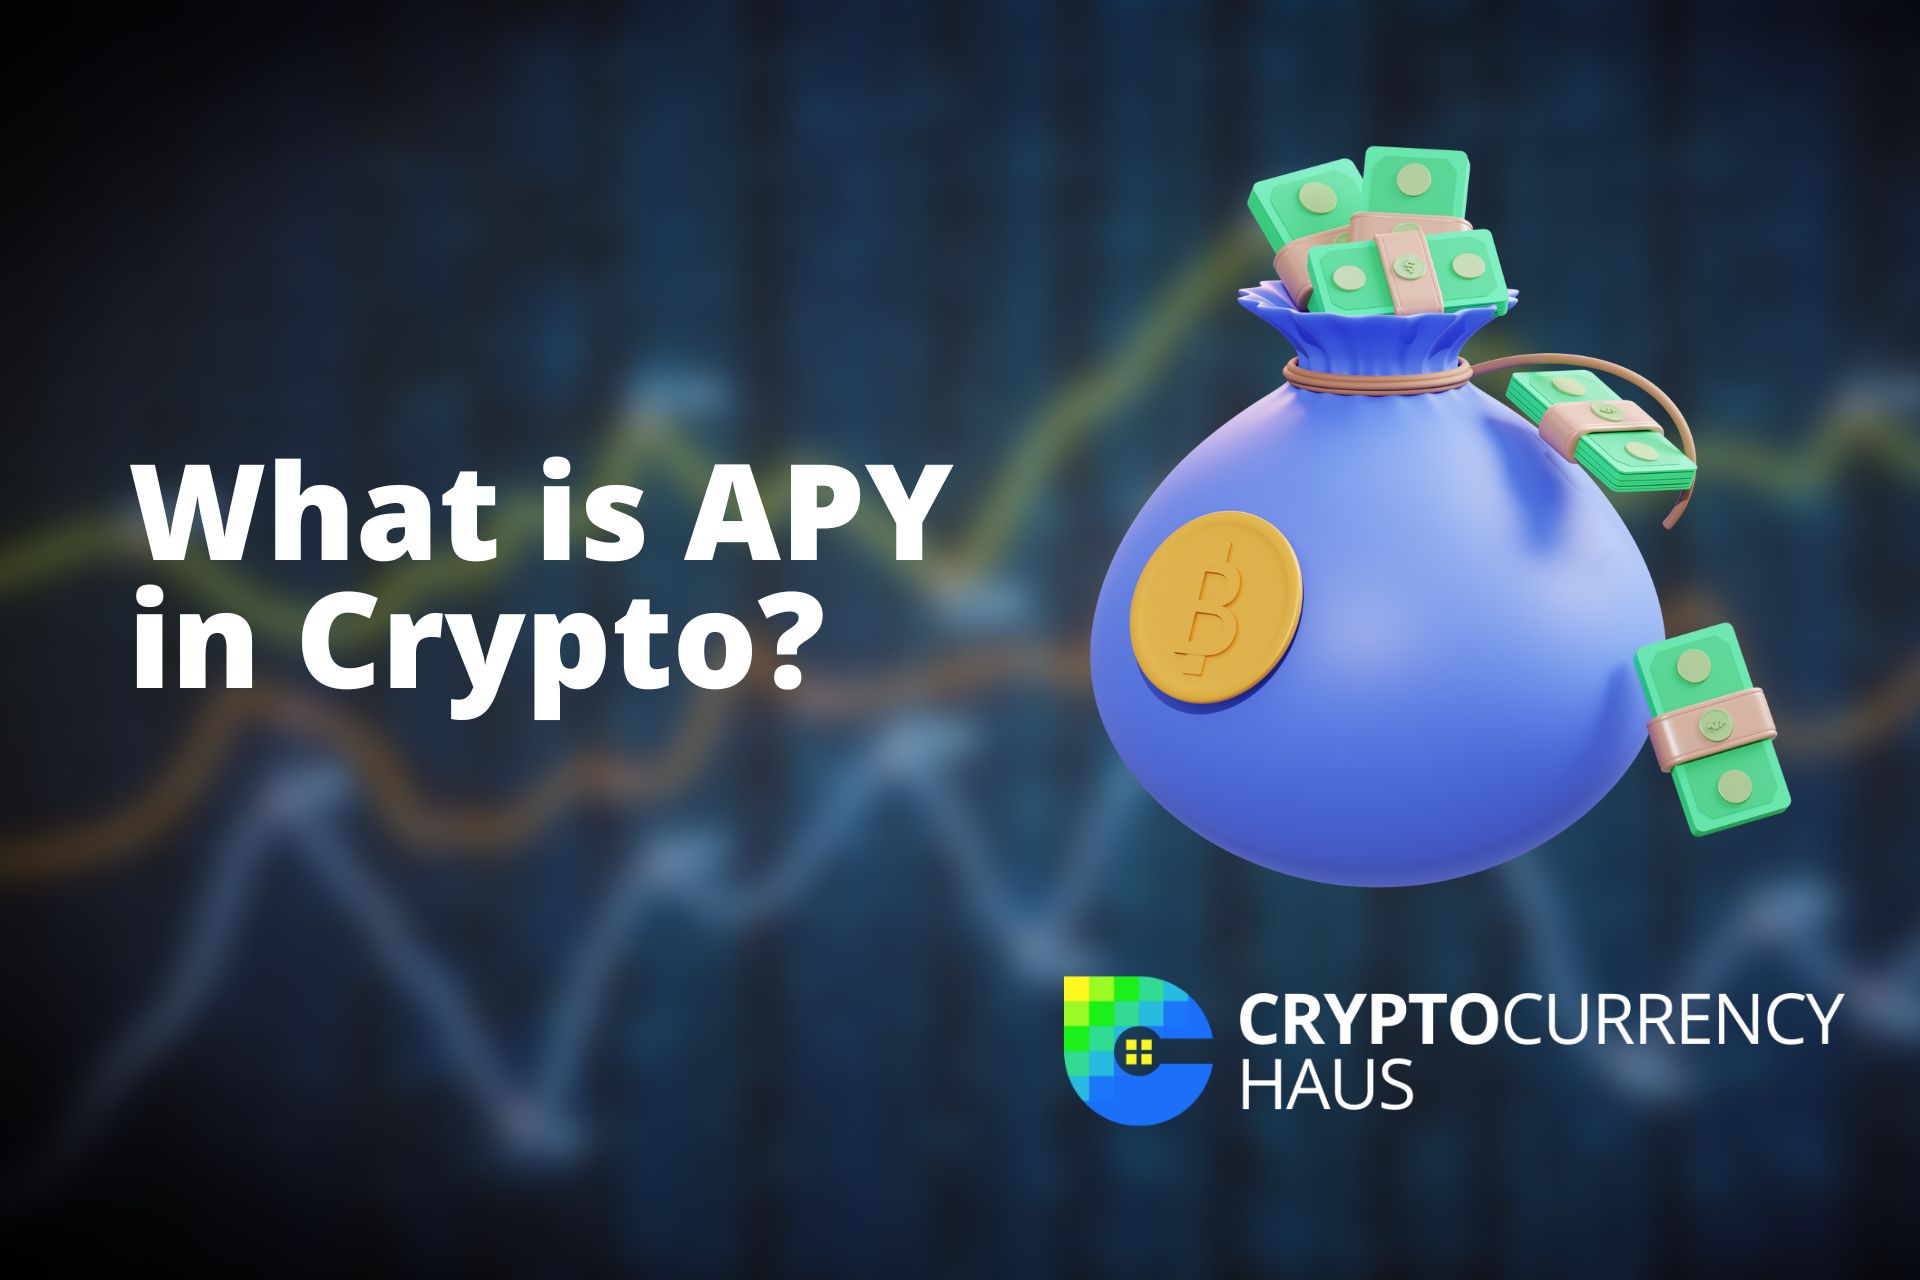 how is crypto apy calculated